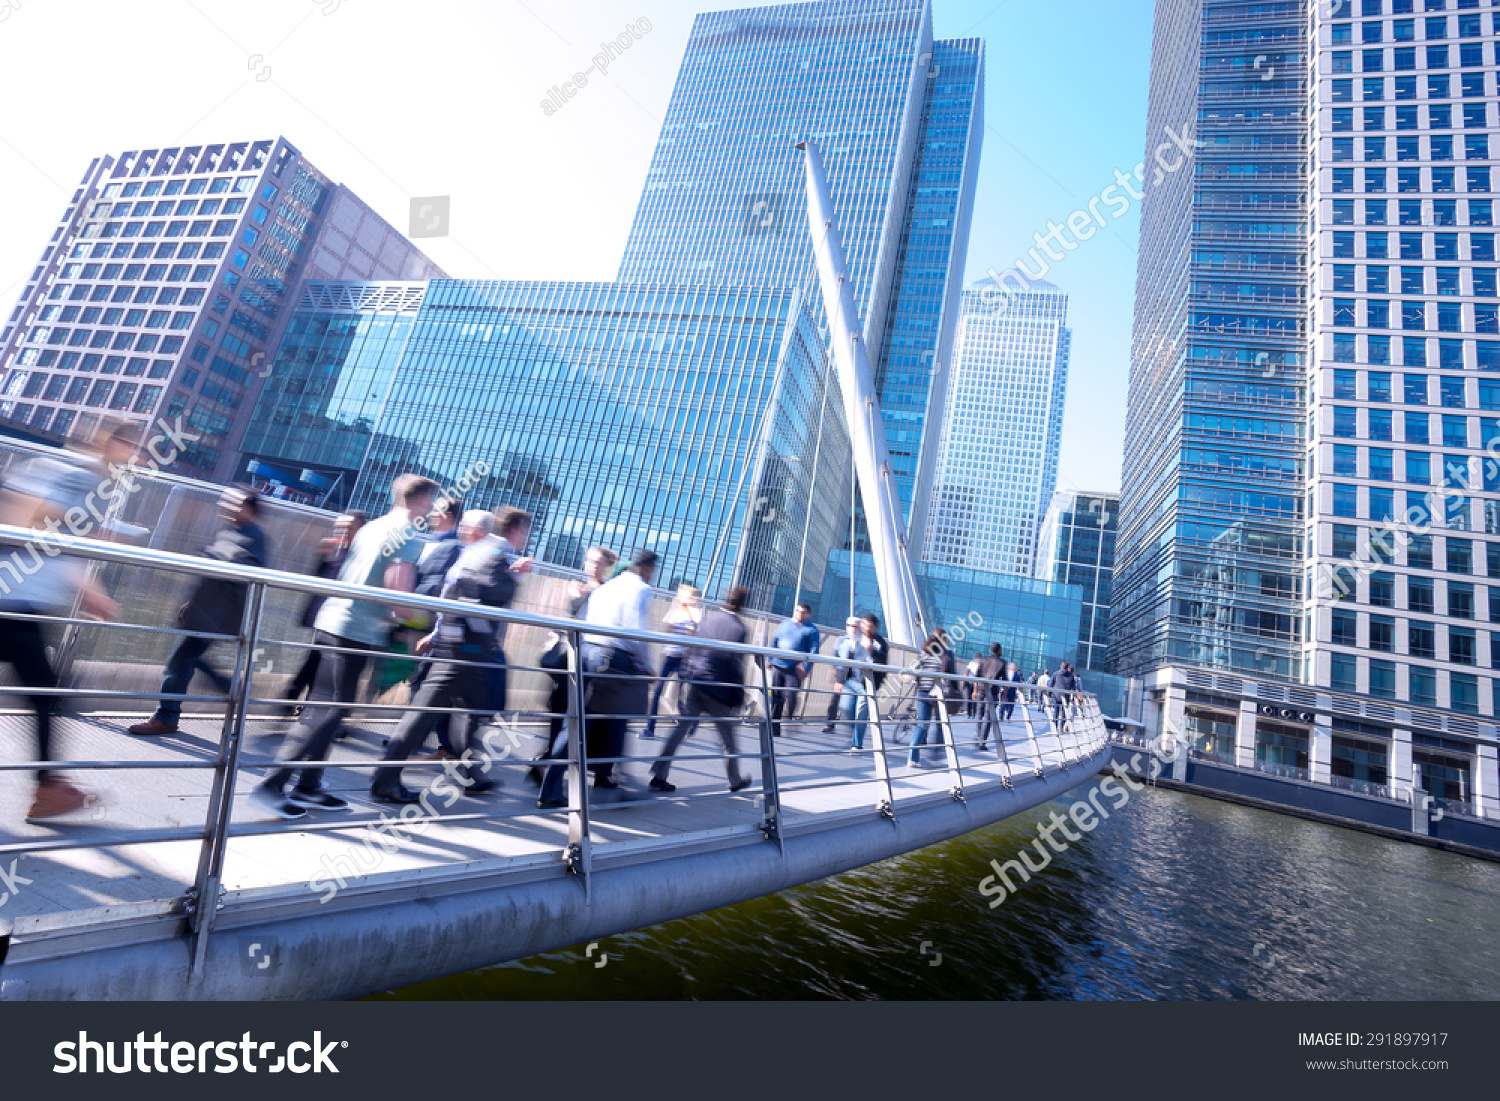 London office buinesss building movement in rush hour #291897917